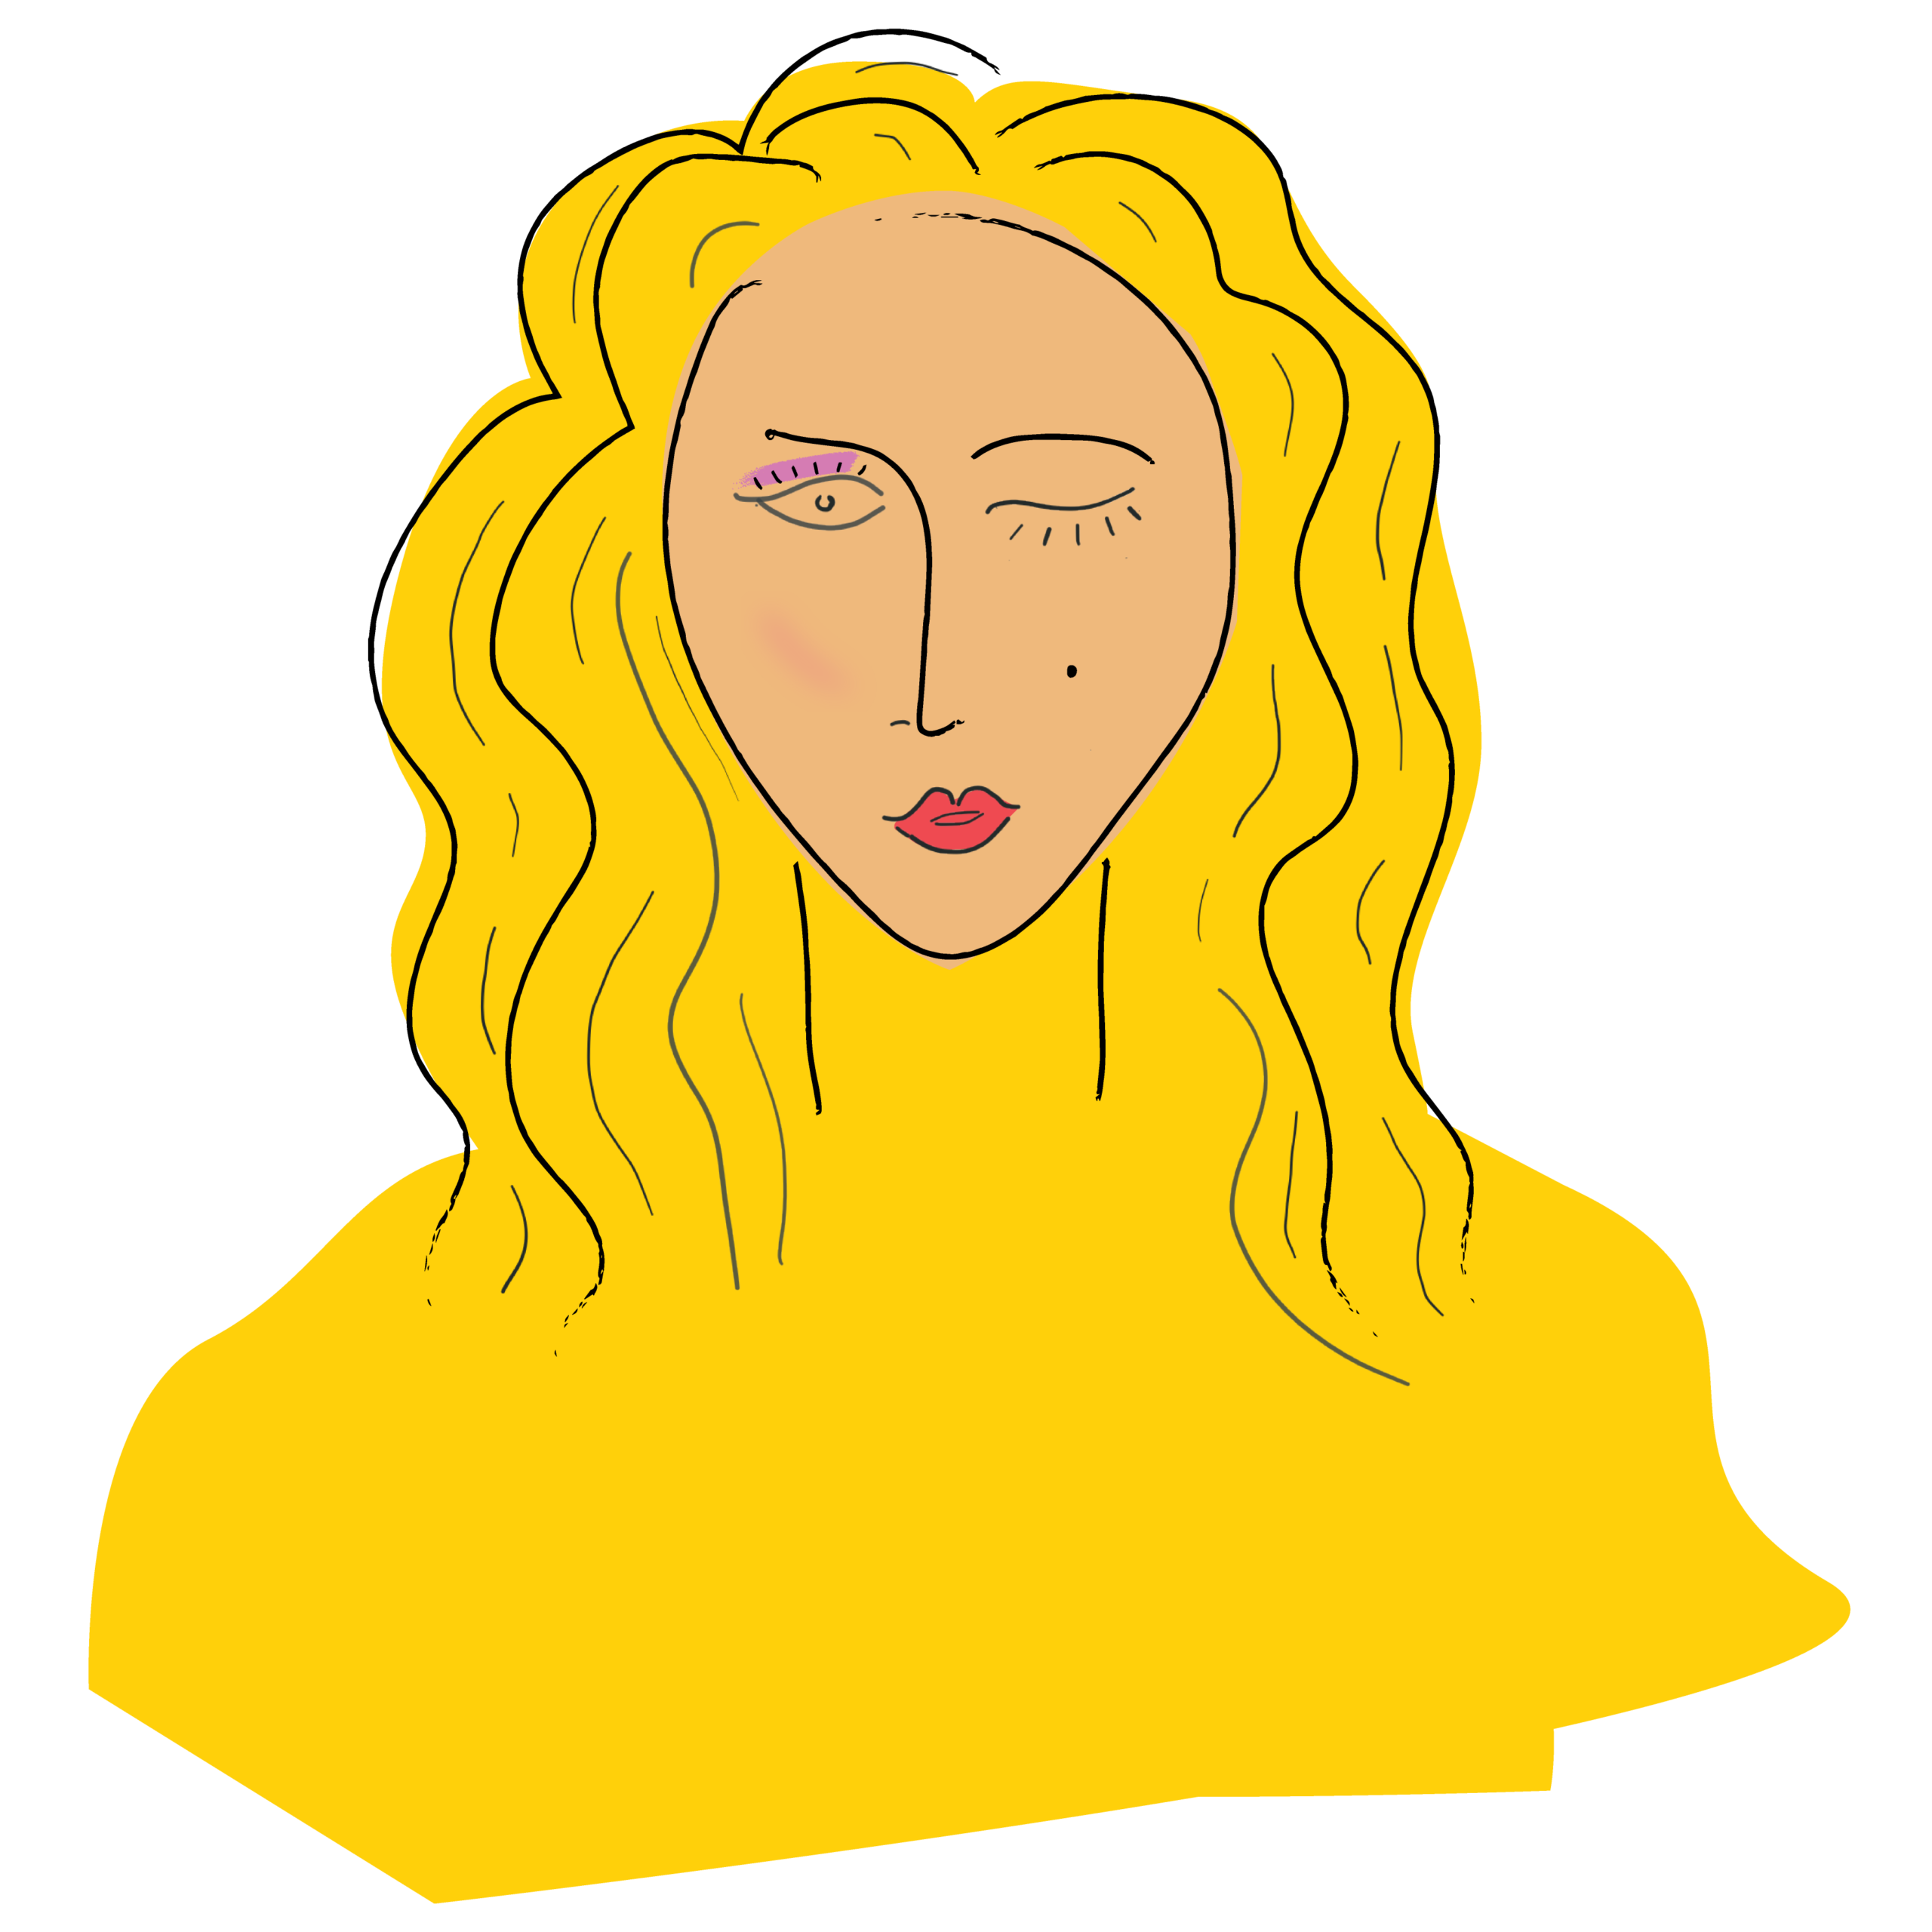 illustration of blonde woman winking on colored background